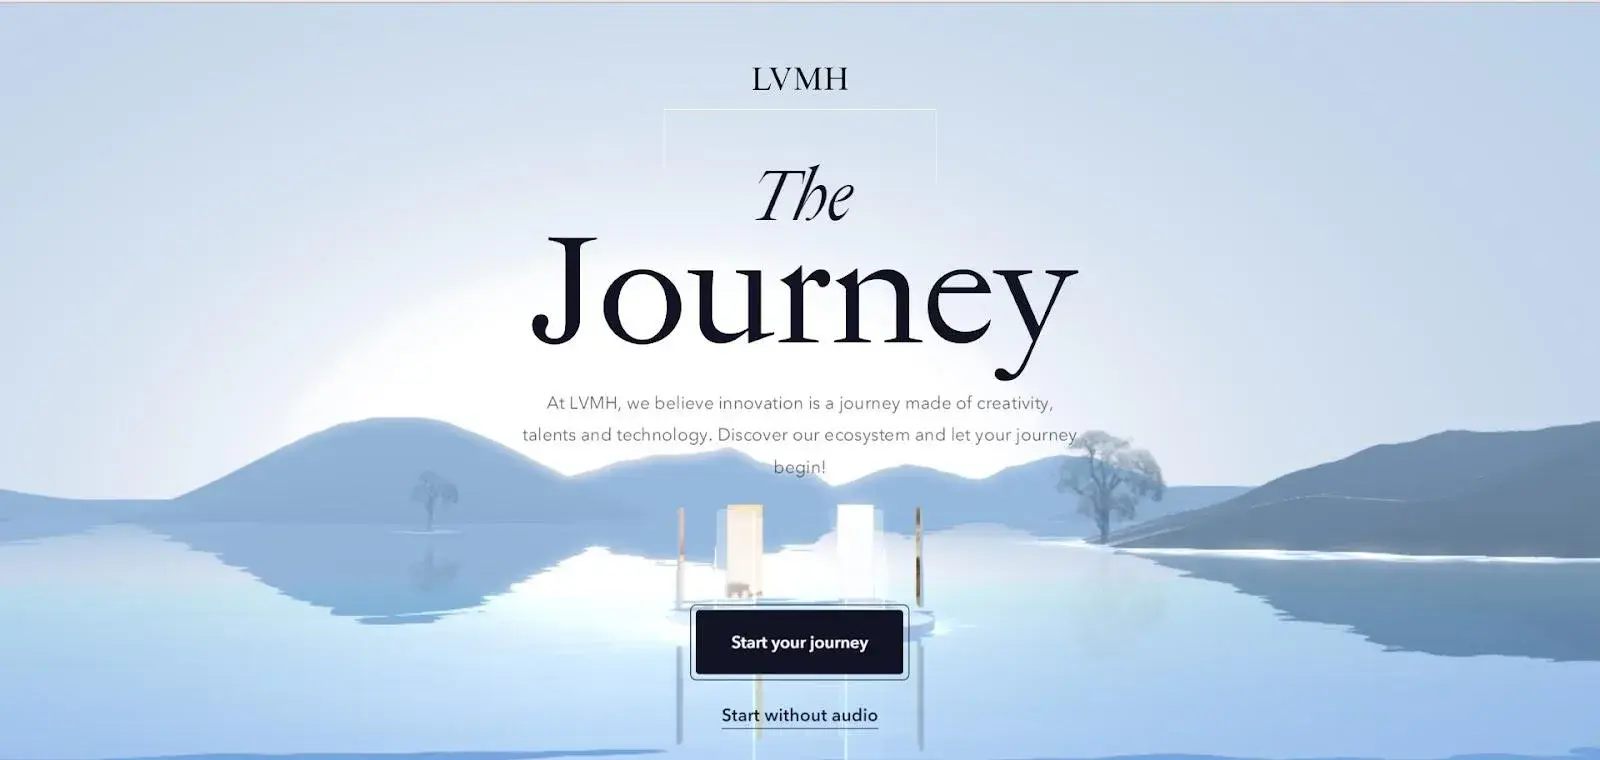 website layout examples, the journey uses a video effect layout